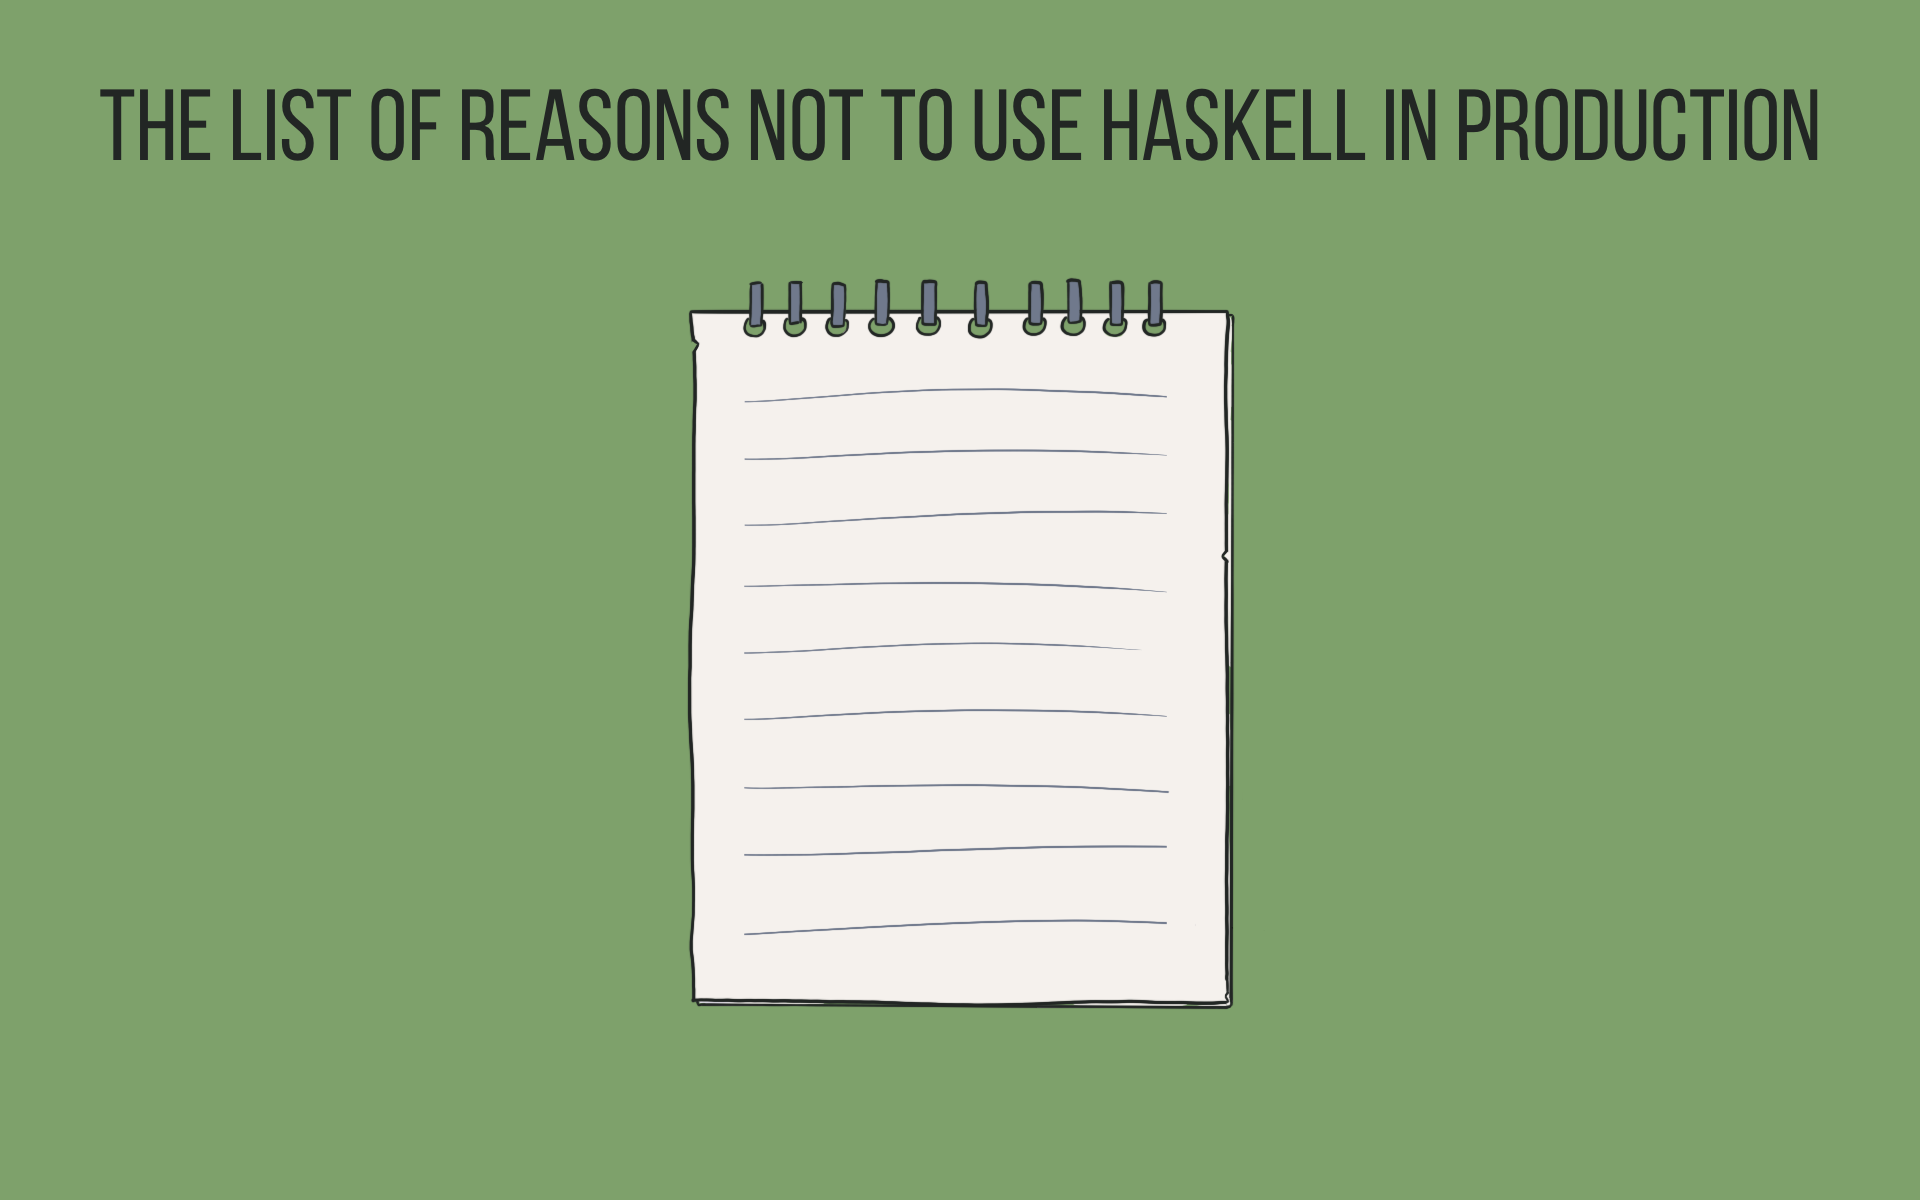 The list of reasons not to use Haskell in production